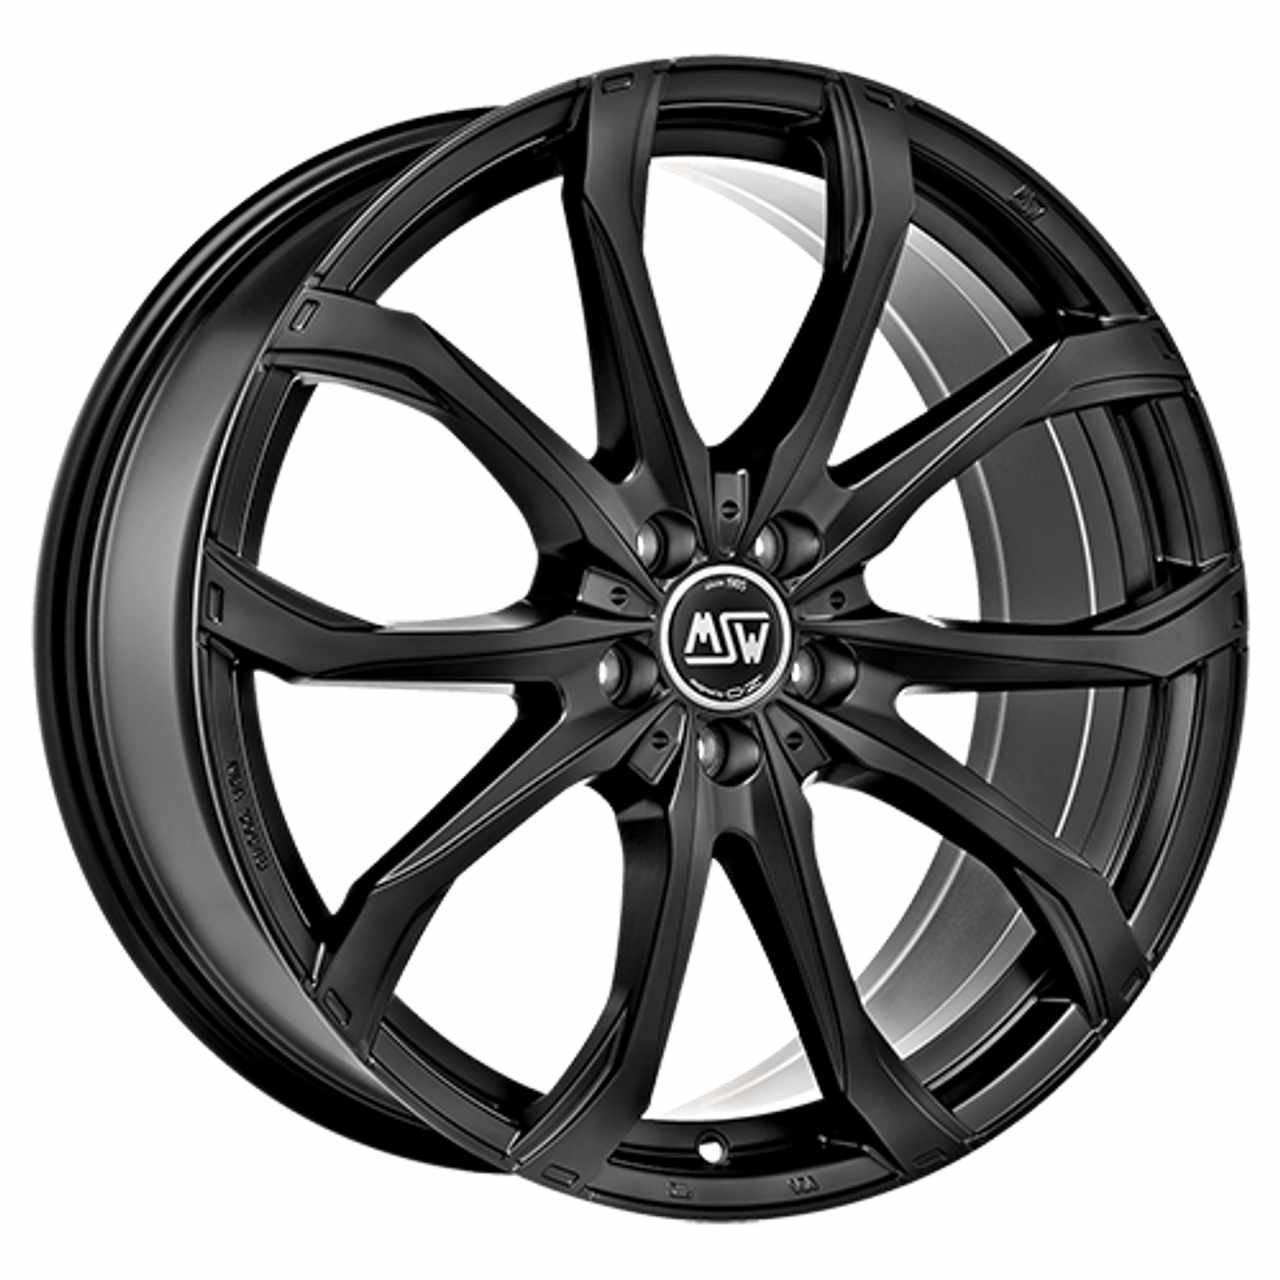 MSW (OZ) MSW 48 gloss black full polished 9.0Jx19 5x120 ET38